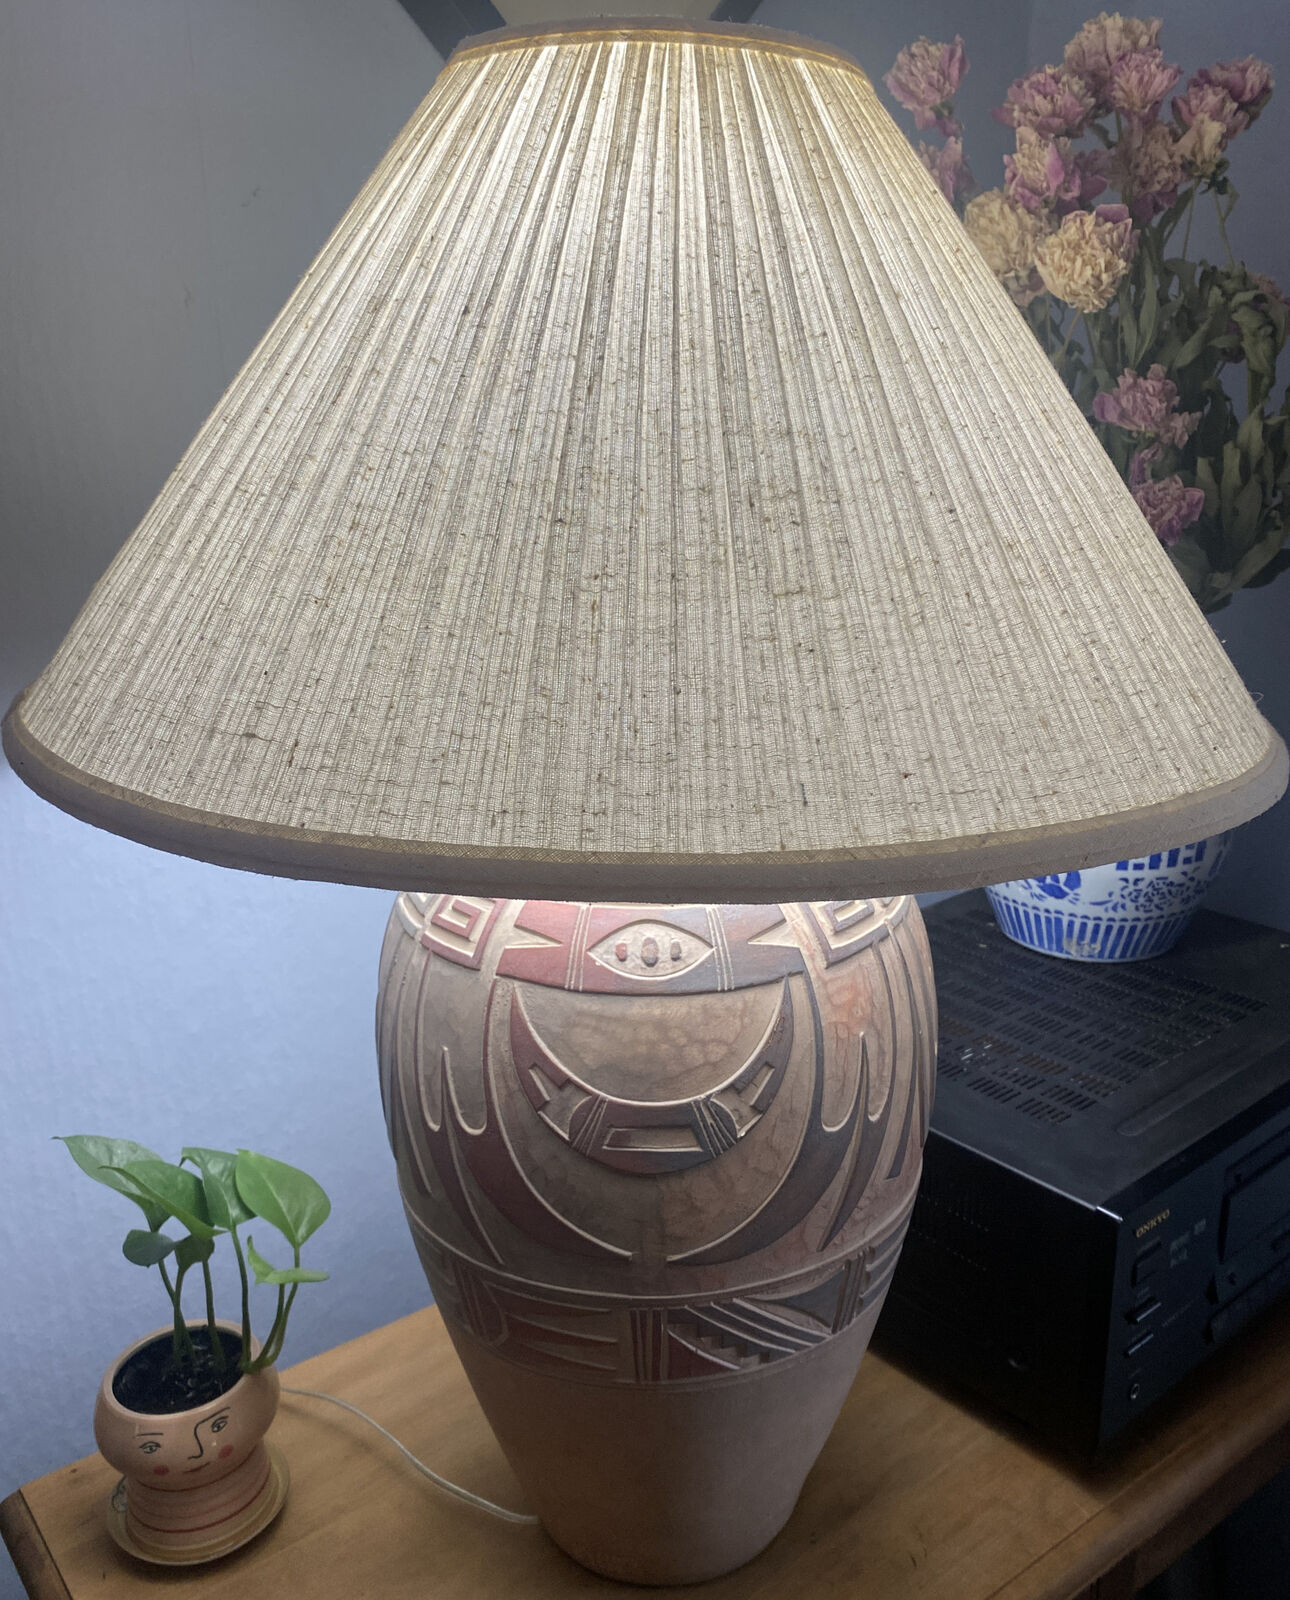 Vintage 1986 Casual Lamps Of California indigenuos design Plaster Table Lamp.